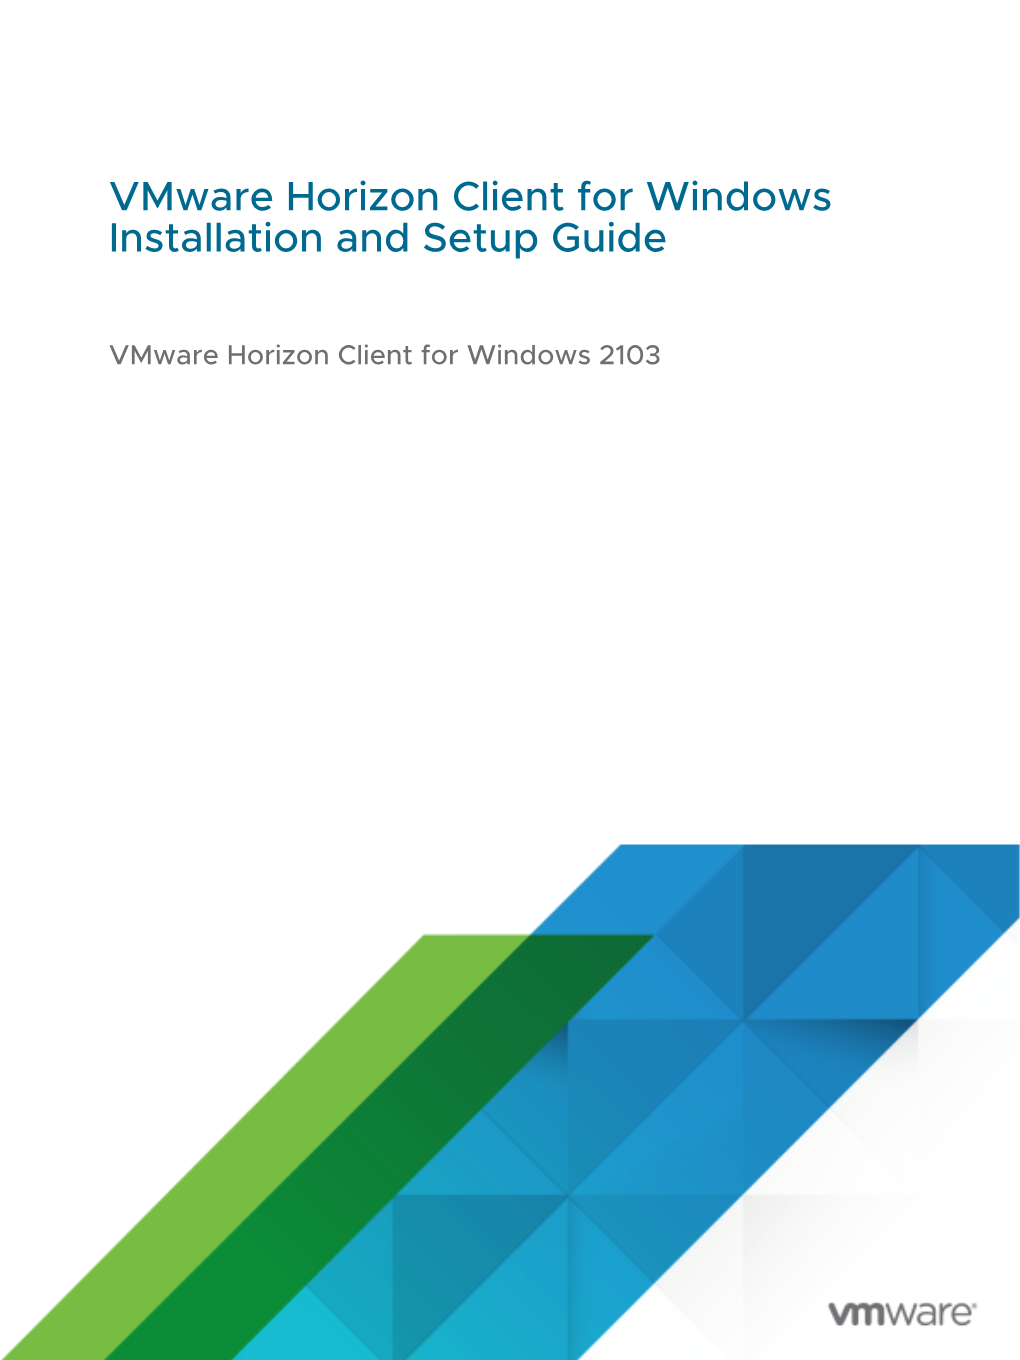 Vmware Horizon Client for Windows Installation and Setup Guide